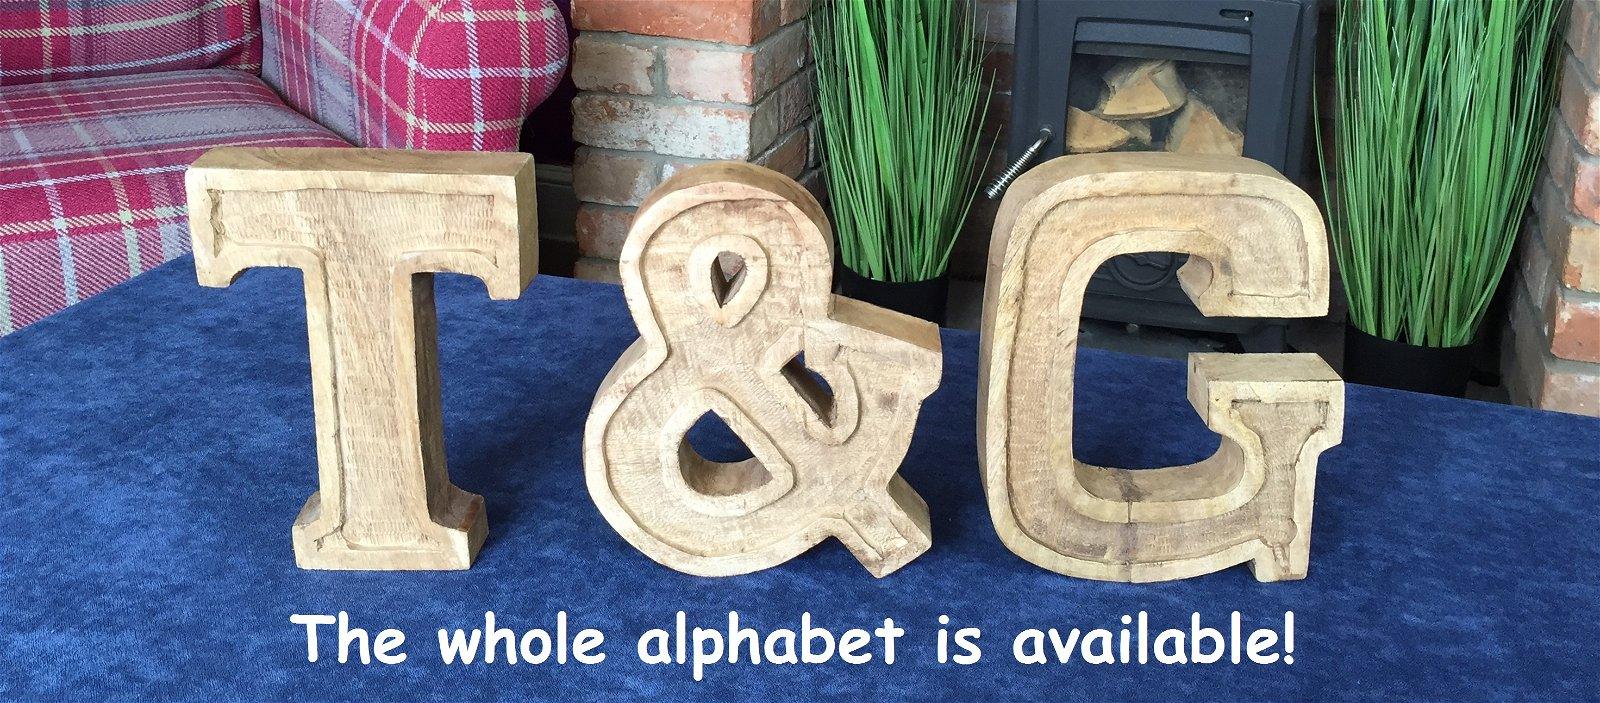 Hand Carved Wooden Embossed Letter F-Single Letters